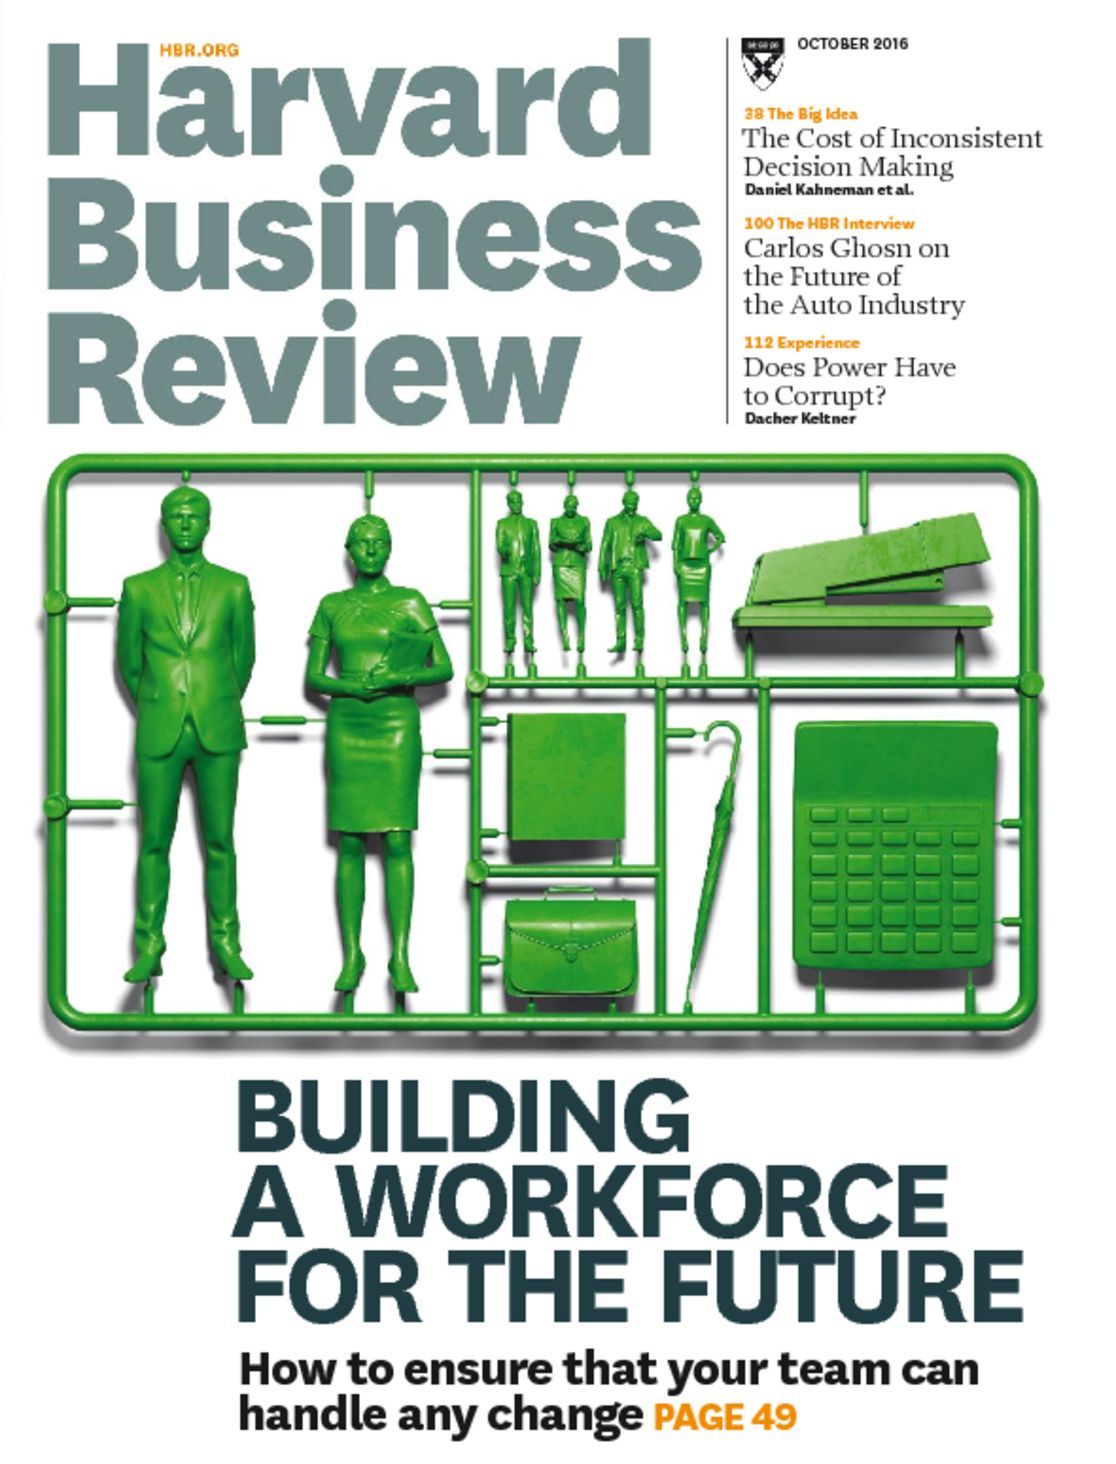 Harvard Business Review Magazine Ideas and Advice for Leaders